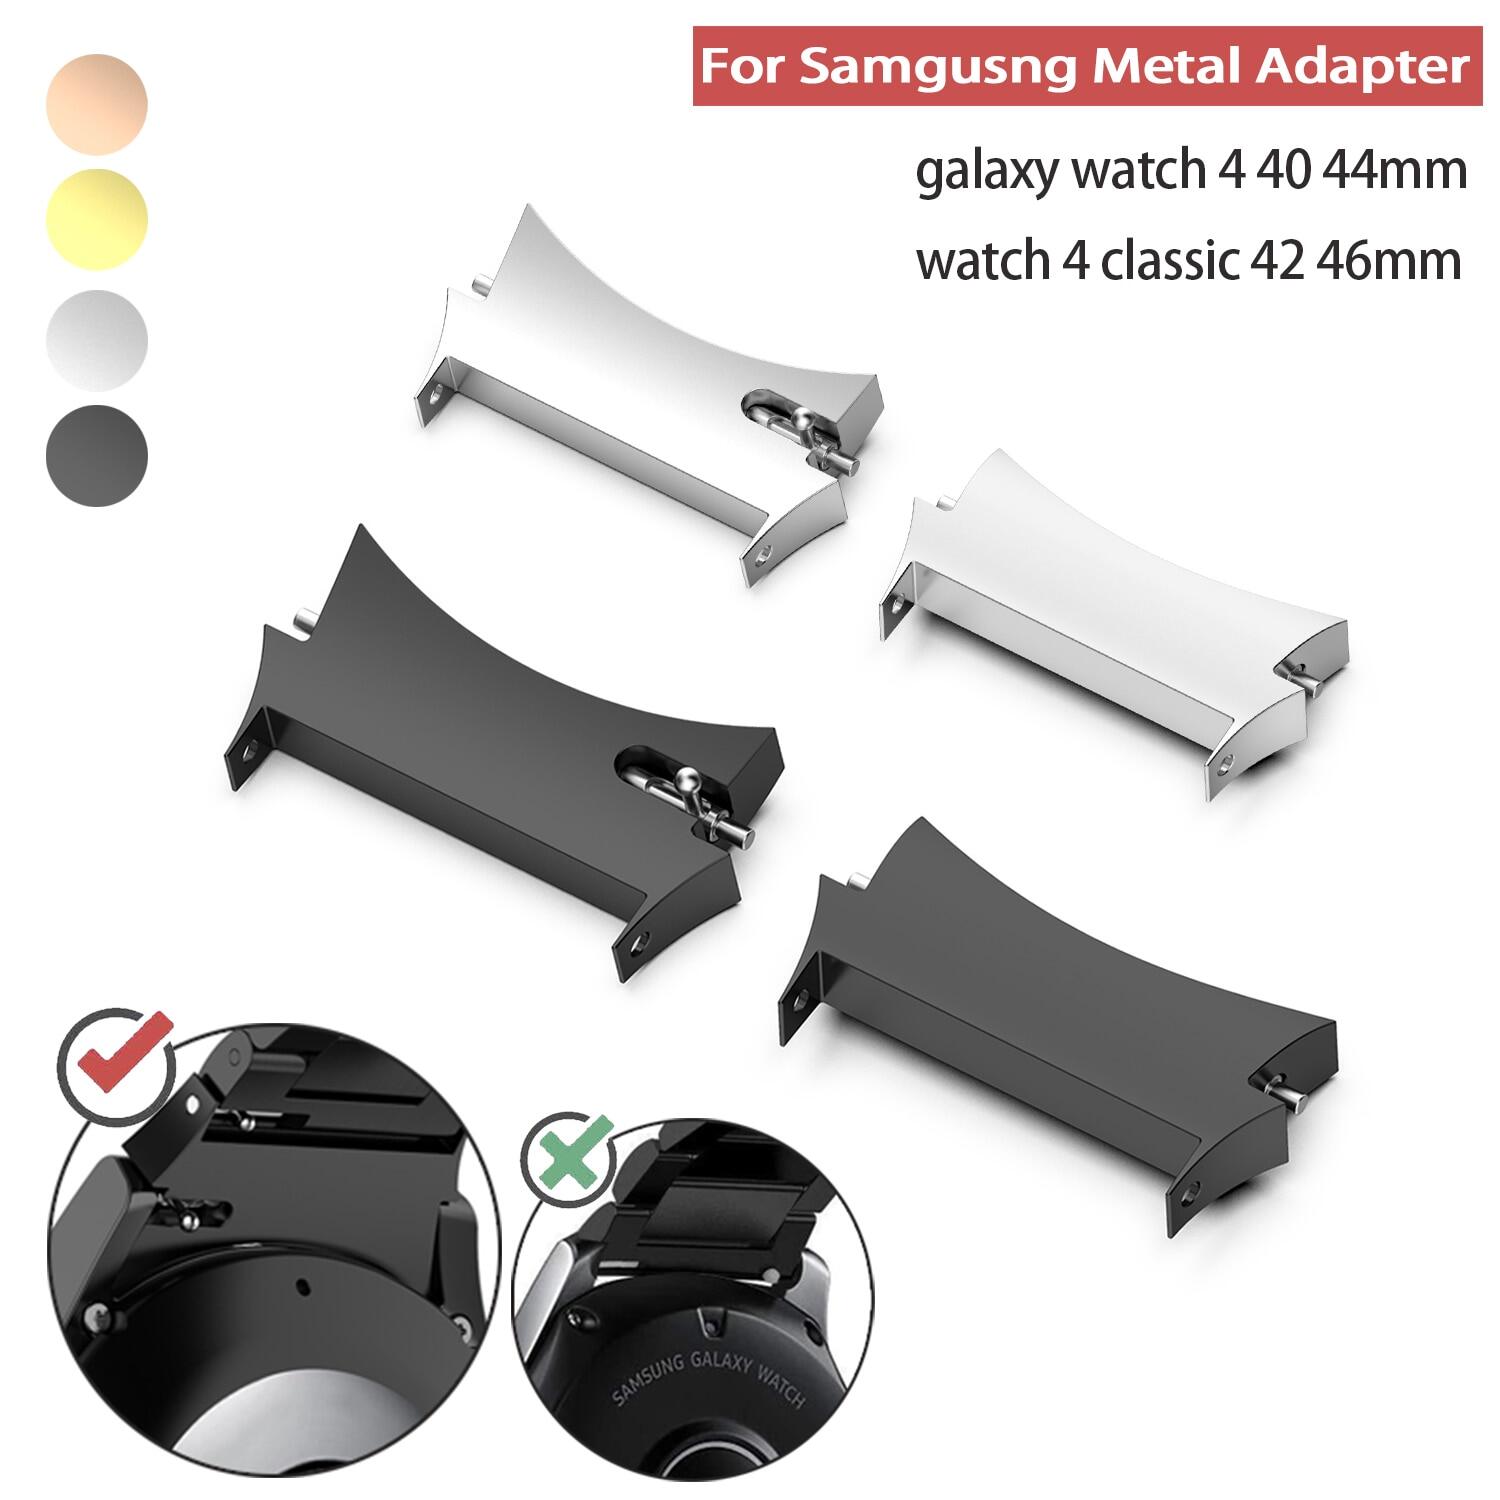 2pc Metal Connector for Samsung Galaxy Watch 4 /5 40mm 44mm Stainless Steel Adapter for Samsung Galaxy Watch 4 Classic 42mm 46mm